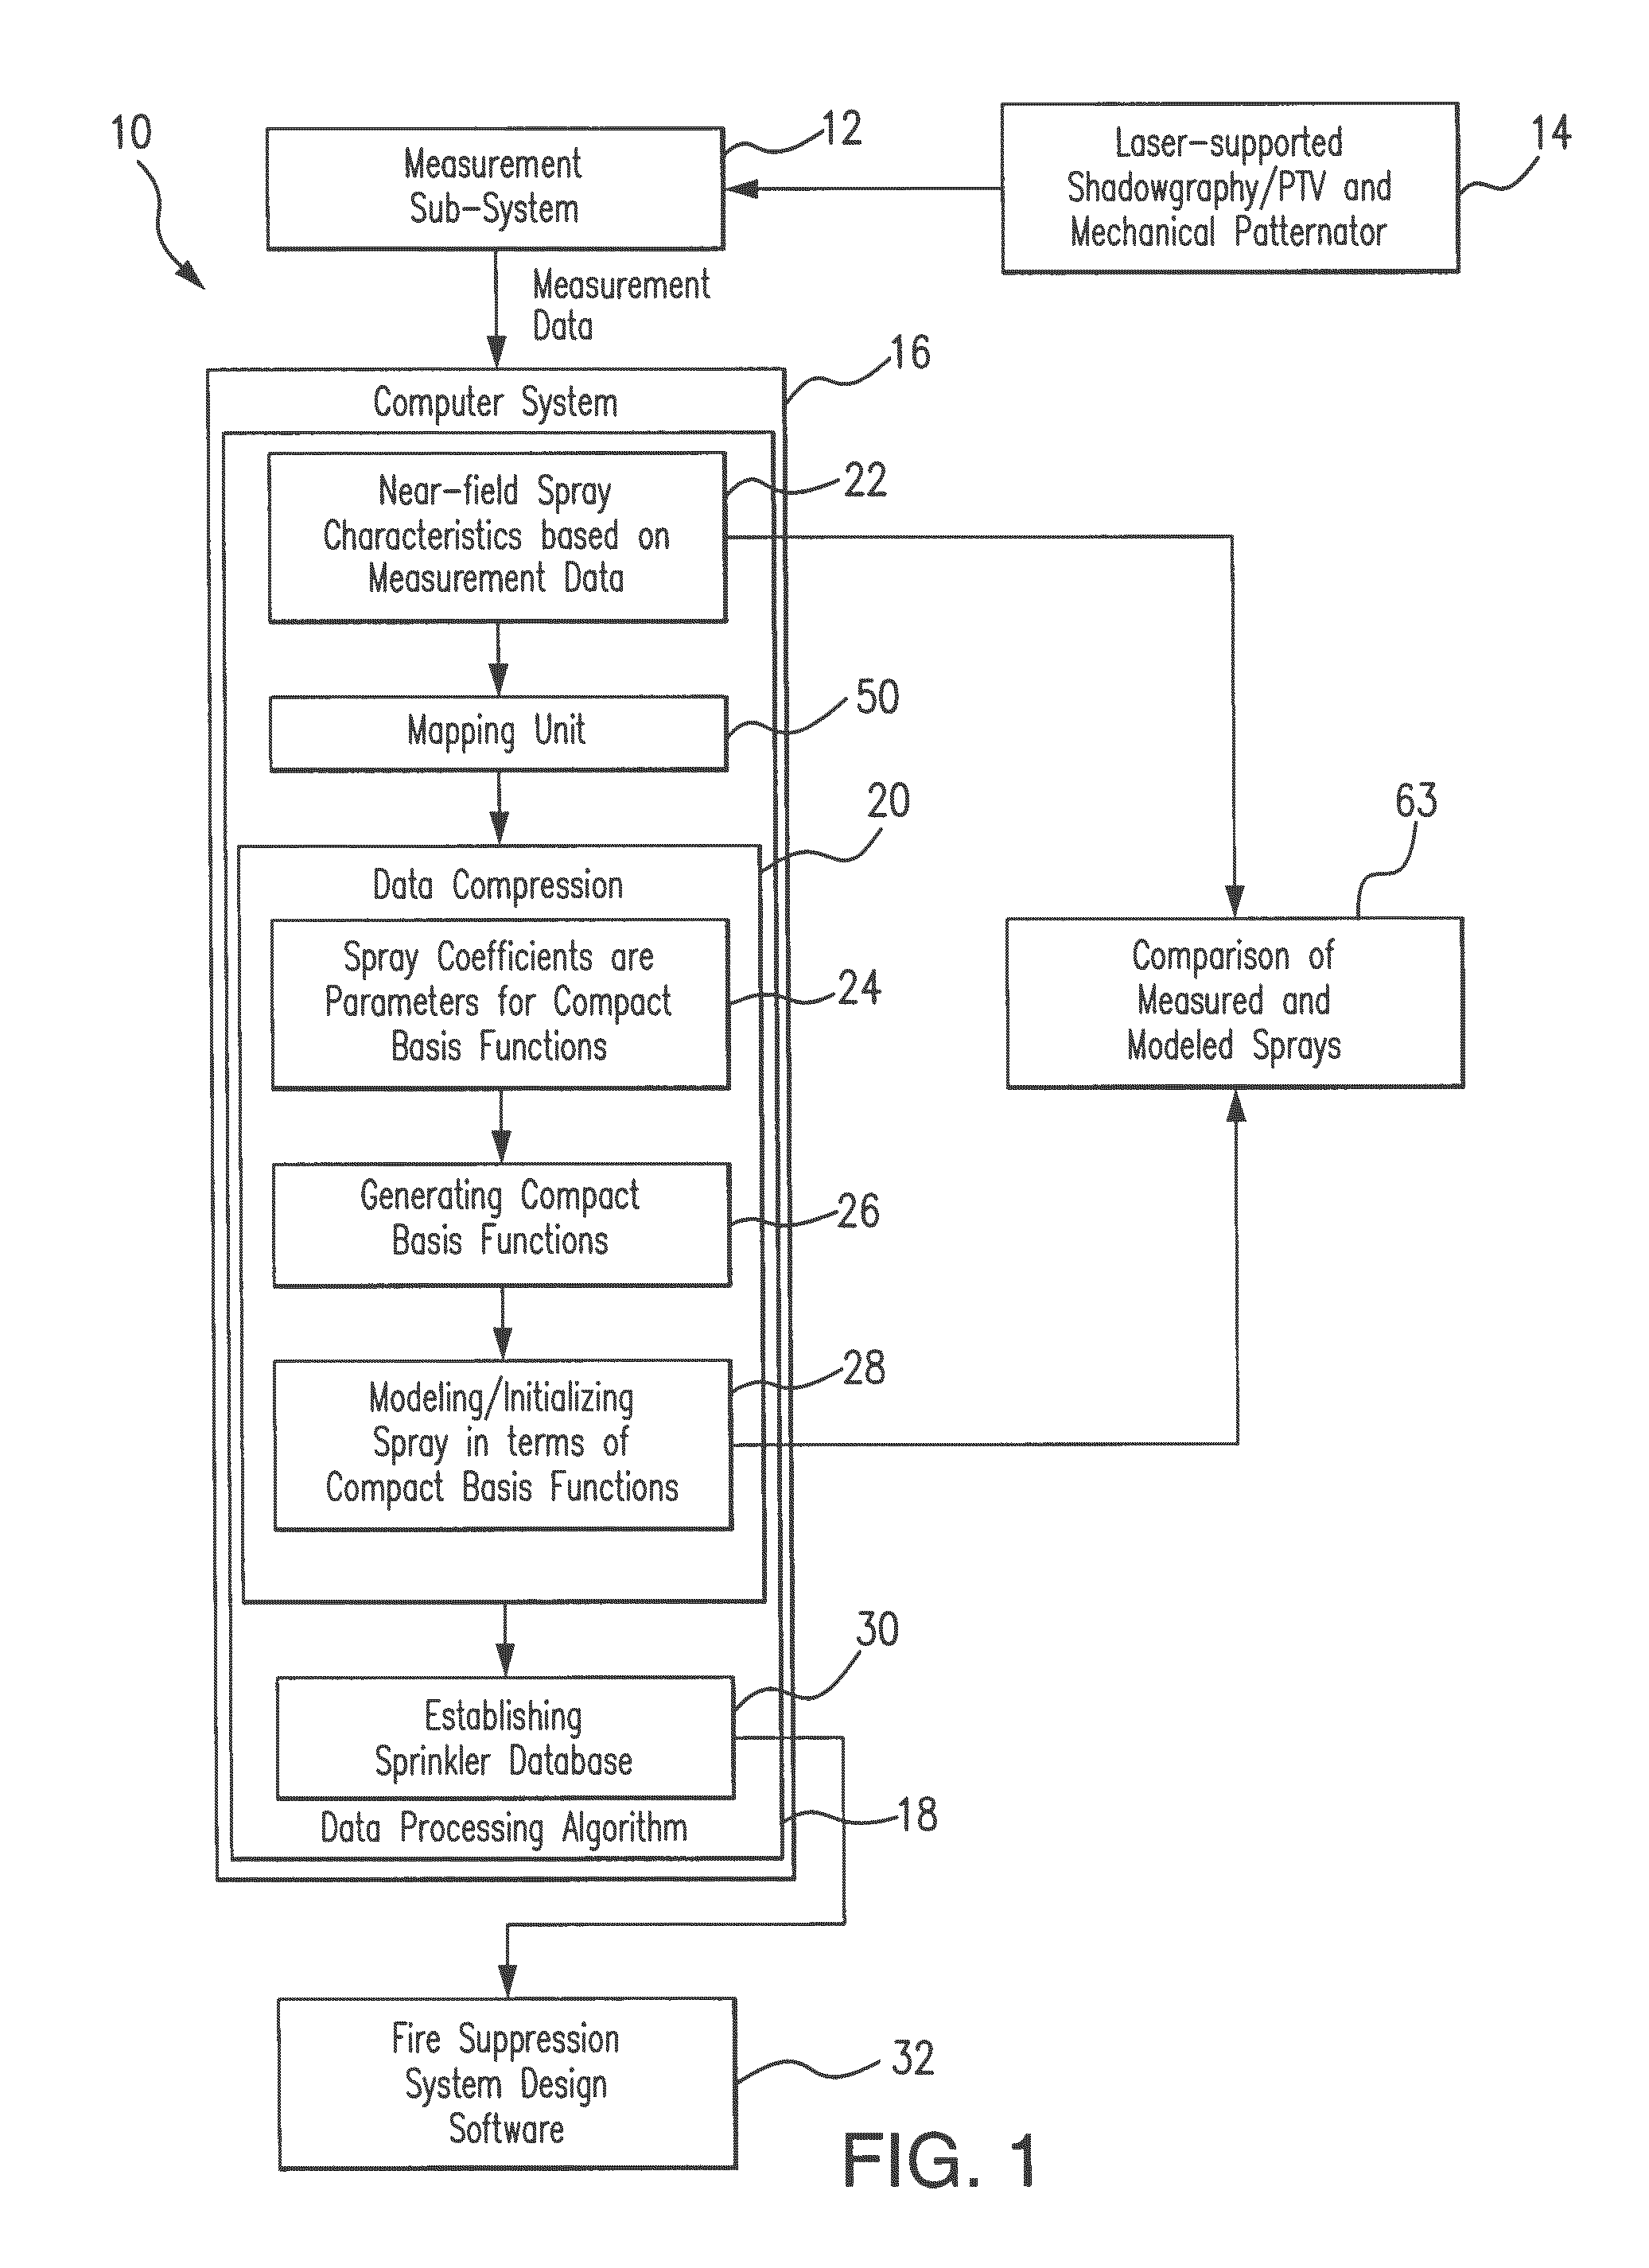 Method and system for evaluation of fire suppression systems performance